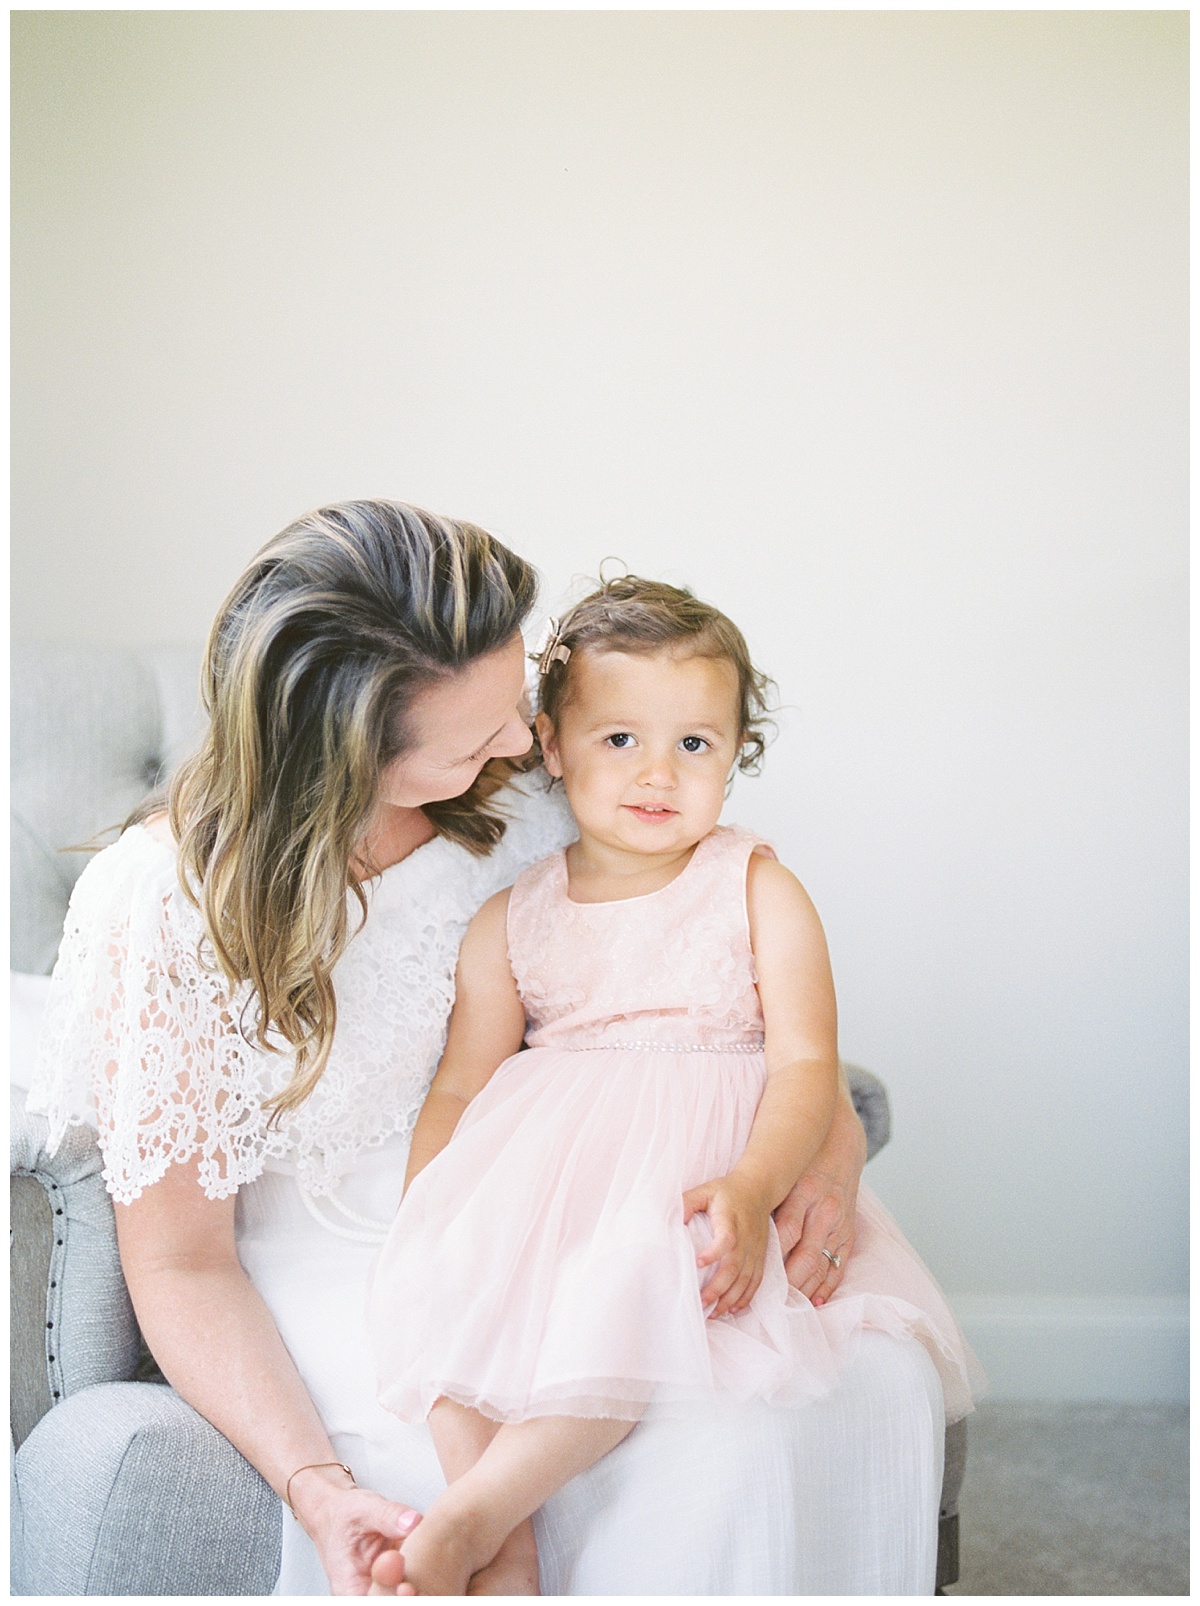 Lifestyle Family maternity session by Tennessee photographer Grace Paul.